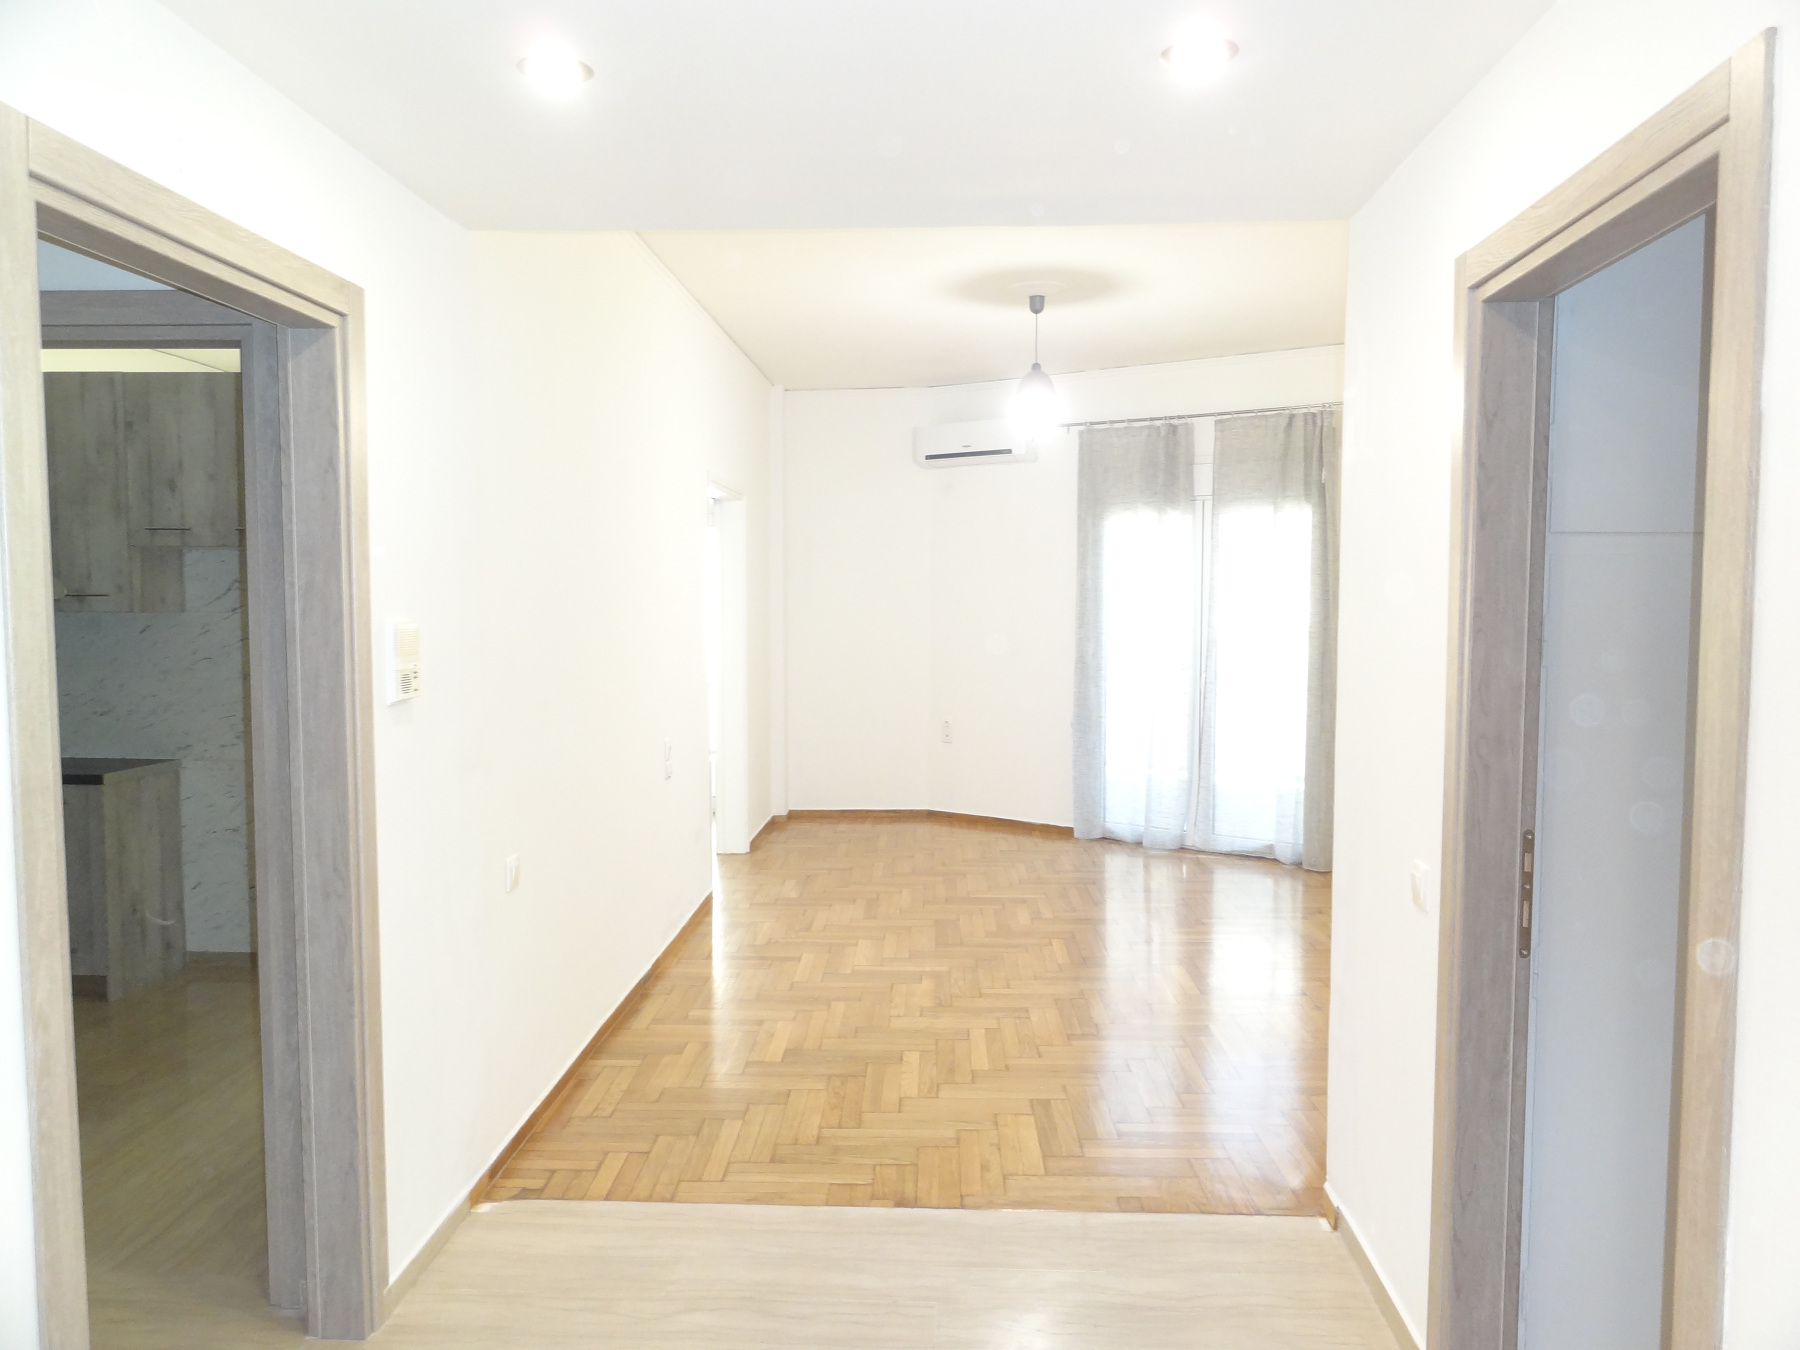 For rent 3 bedrooms apartment 97 sq.m. 3rd floor fully renovated in 2022 in the center of Ioannina